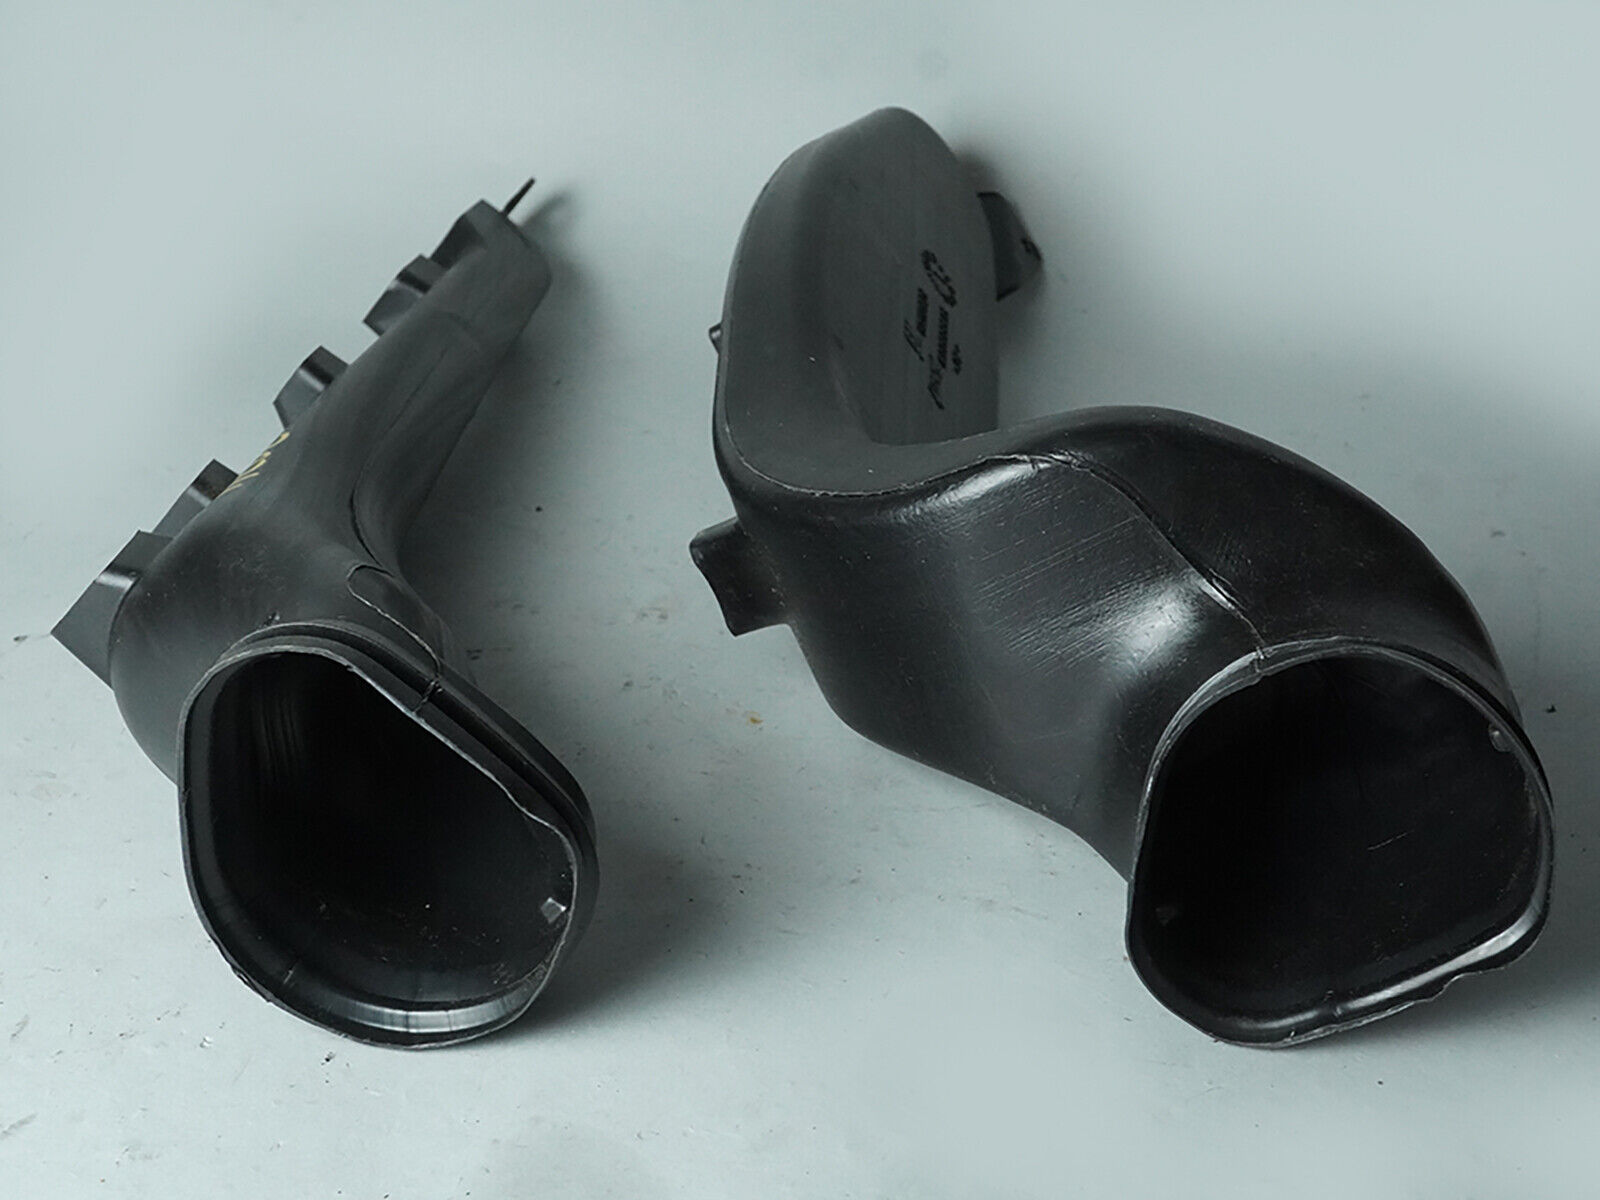 2008 - 2009 Saturn Astra Ashtray Air Intake Hose Tube Duct Set Of 2 Front Oem